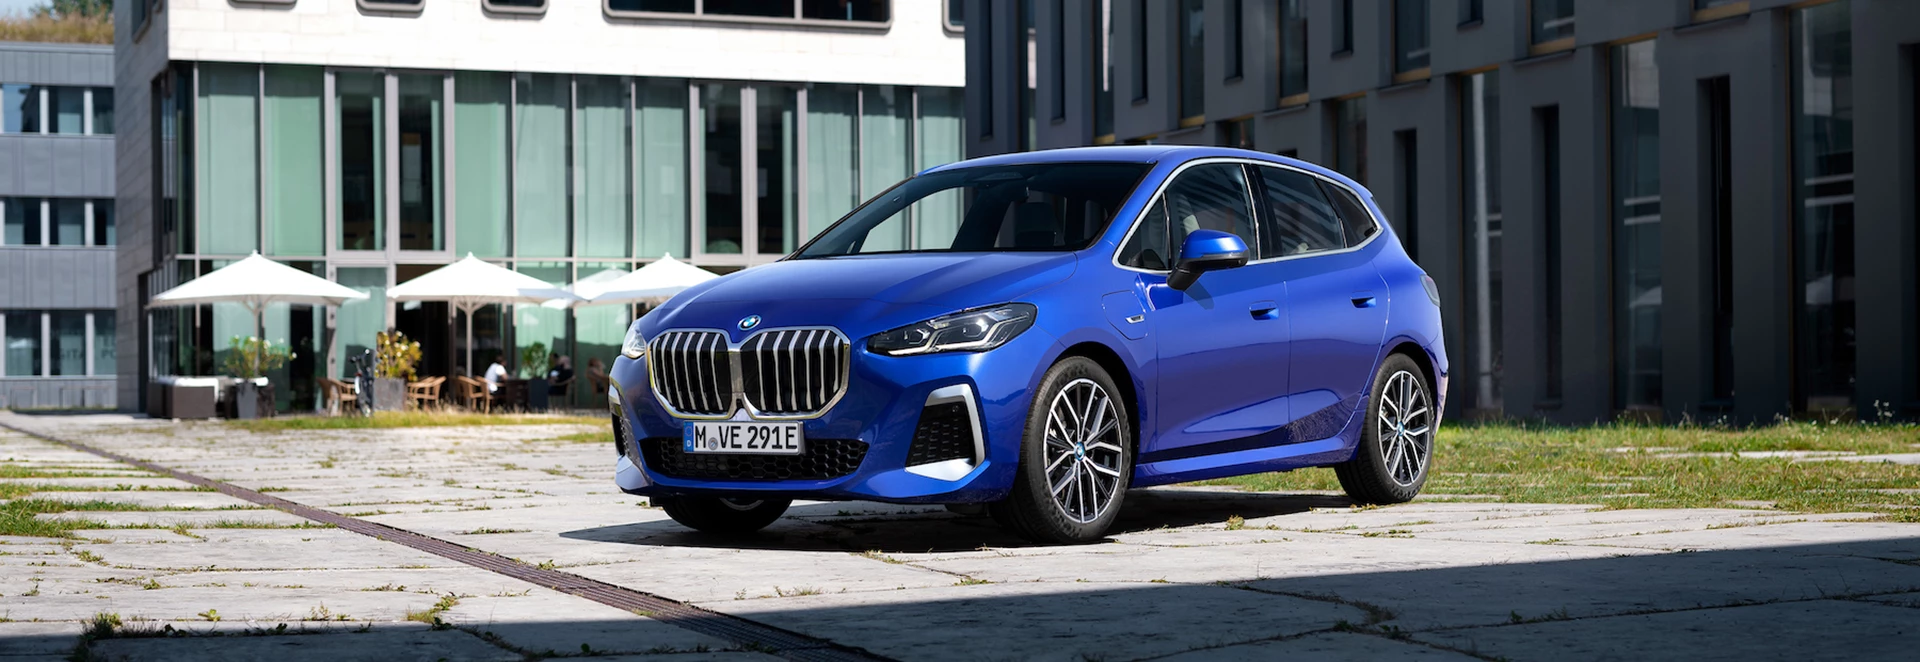 BMW 2 Series Active Tourer: What you need to know 